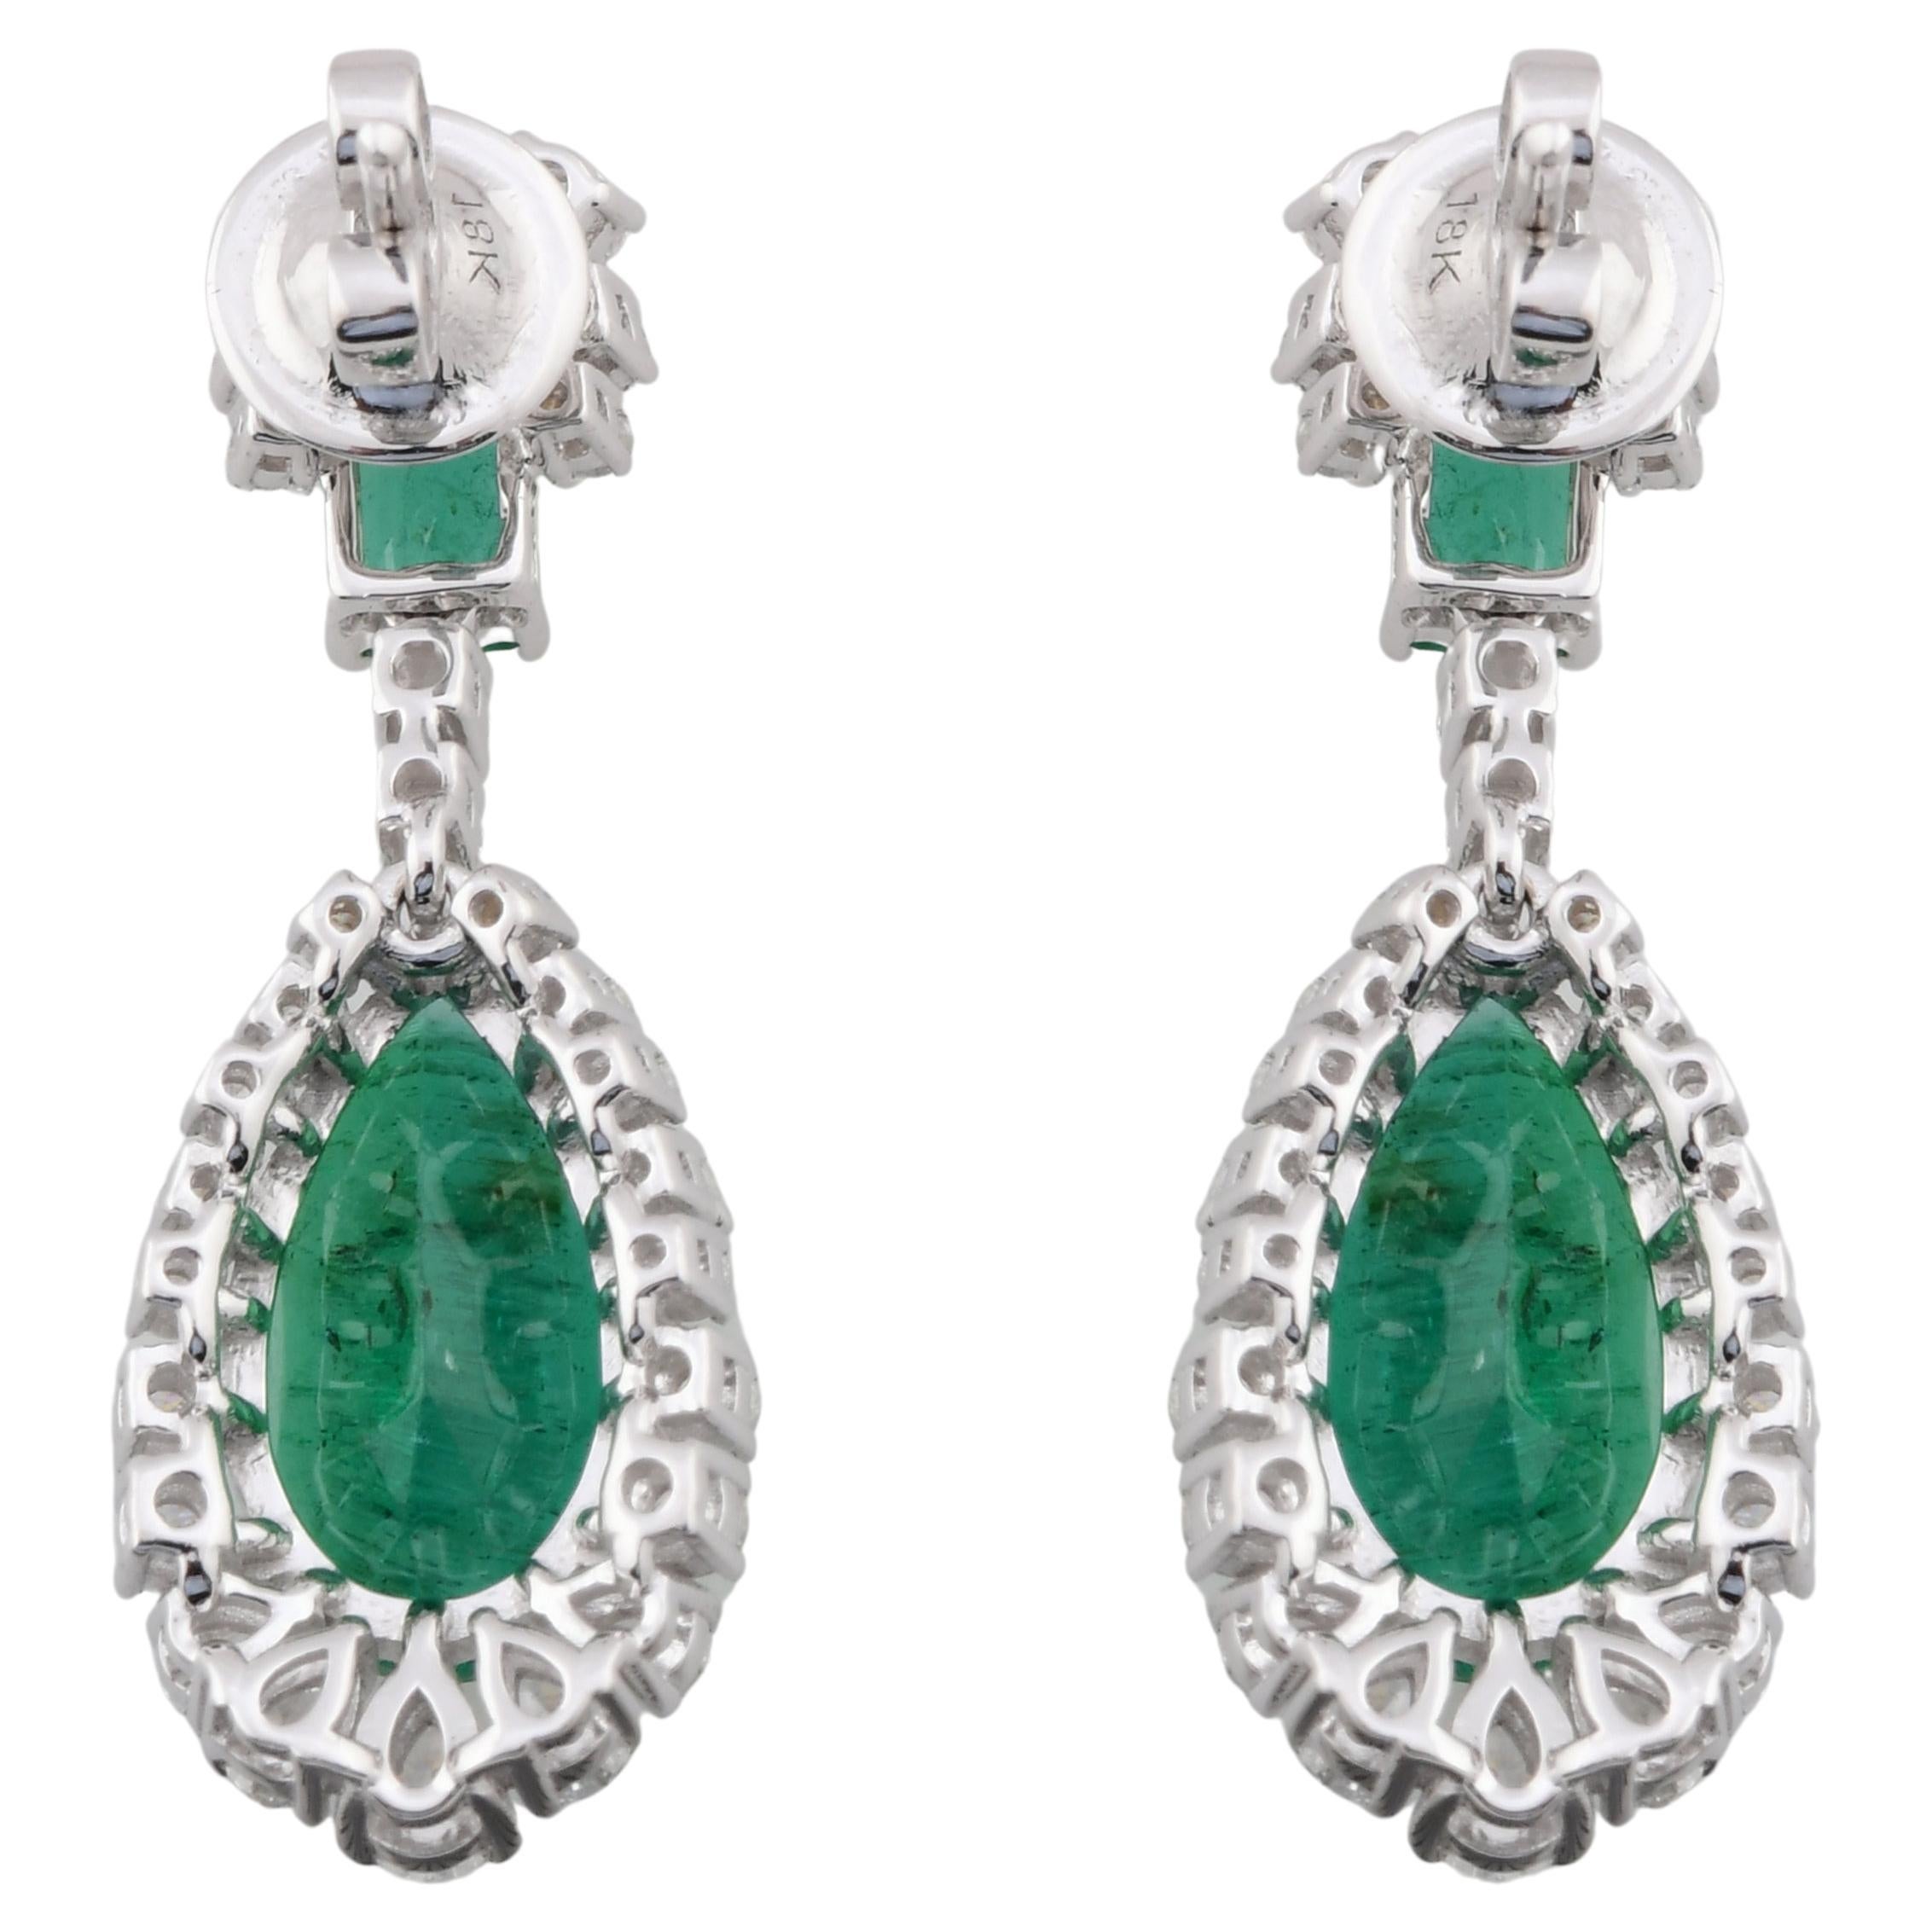 Item Code :- SEE-12593
Gross Wt. :- 9.60 gm
18k White Gold Wt. :- 7.77 gm
Diamond Wt. :- 1.93 Ct. ( AVERAGE DIAMOND CLARITY SI1-SI2 & COLOR H-I )
Emerald Wt. :- 7.20 Ct.
Earrings Size :- 34 mm approx.
✦ Sizing
.....................
We can adjust